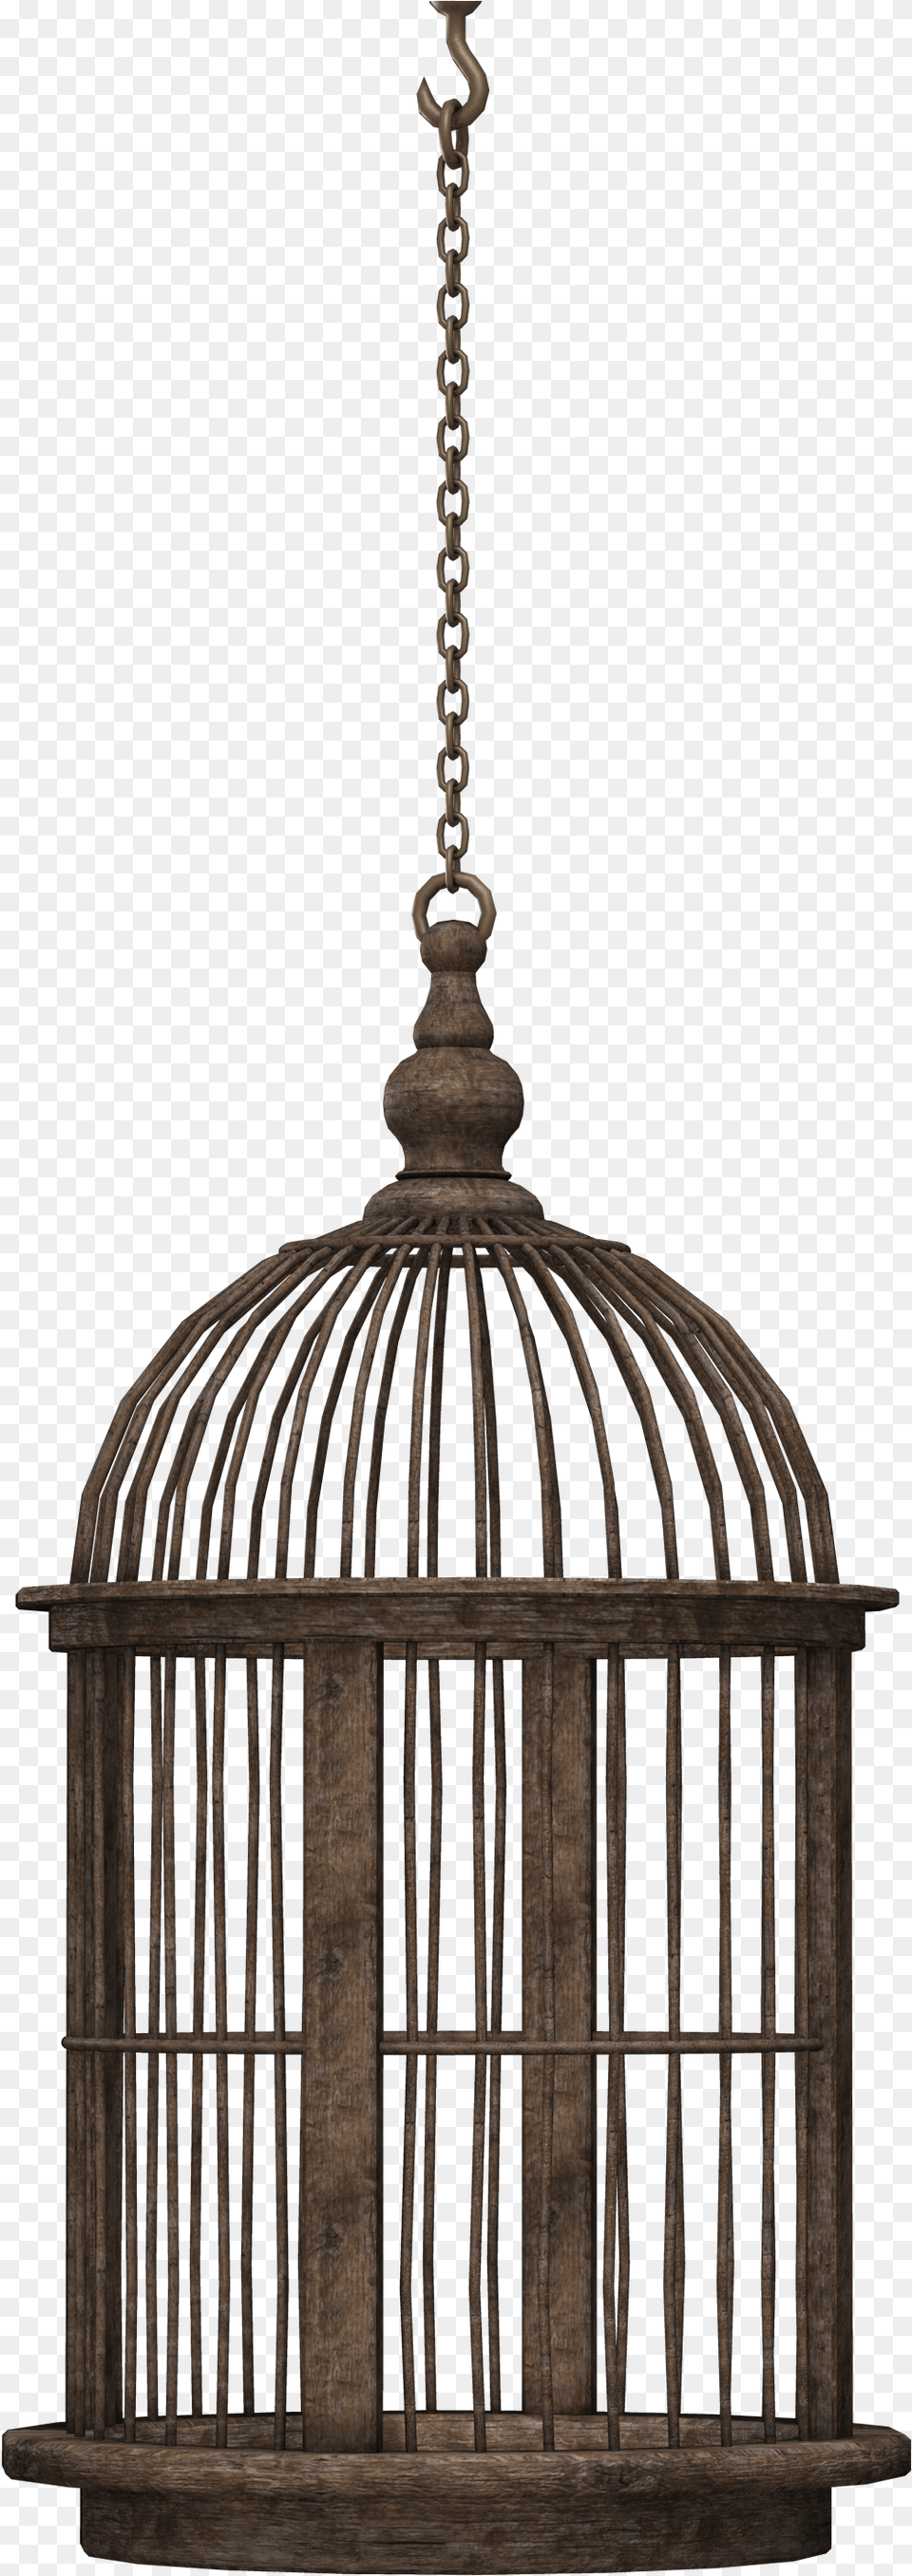 Cage Bird Cage, Lamp Free Png Download